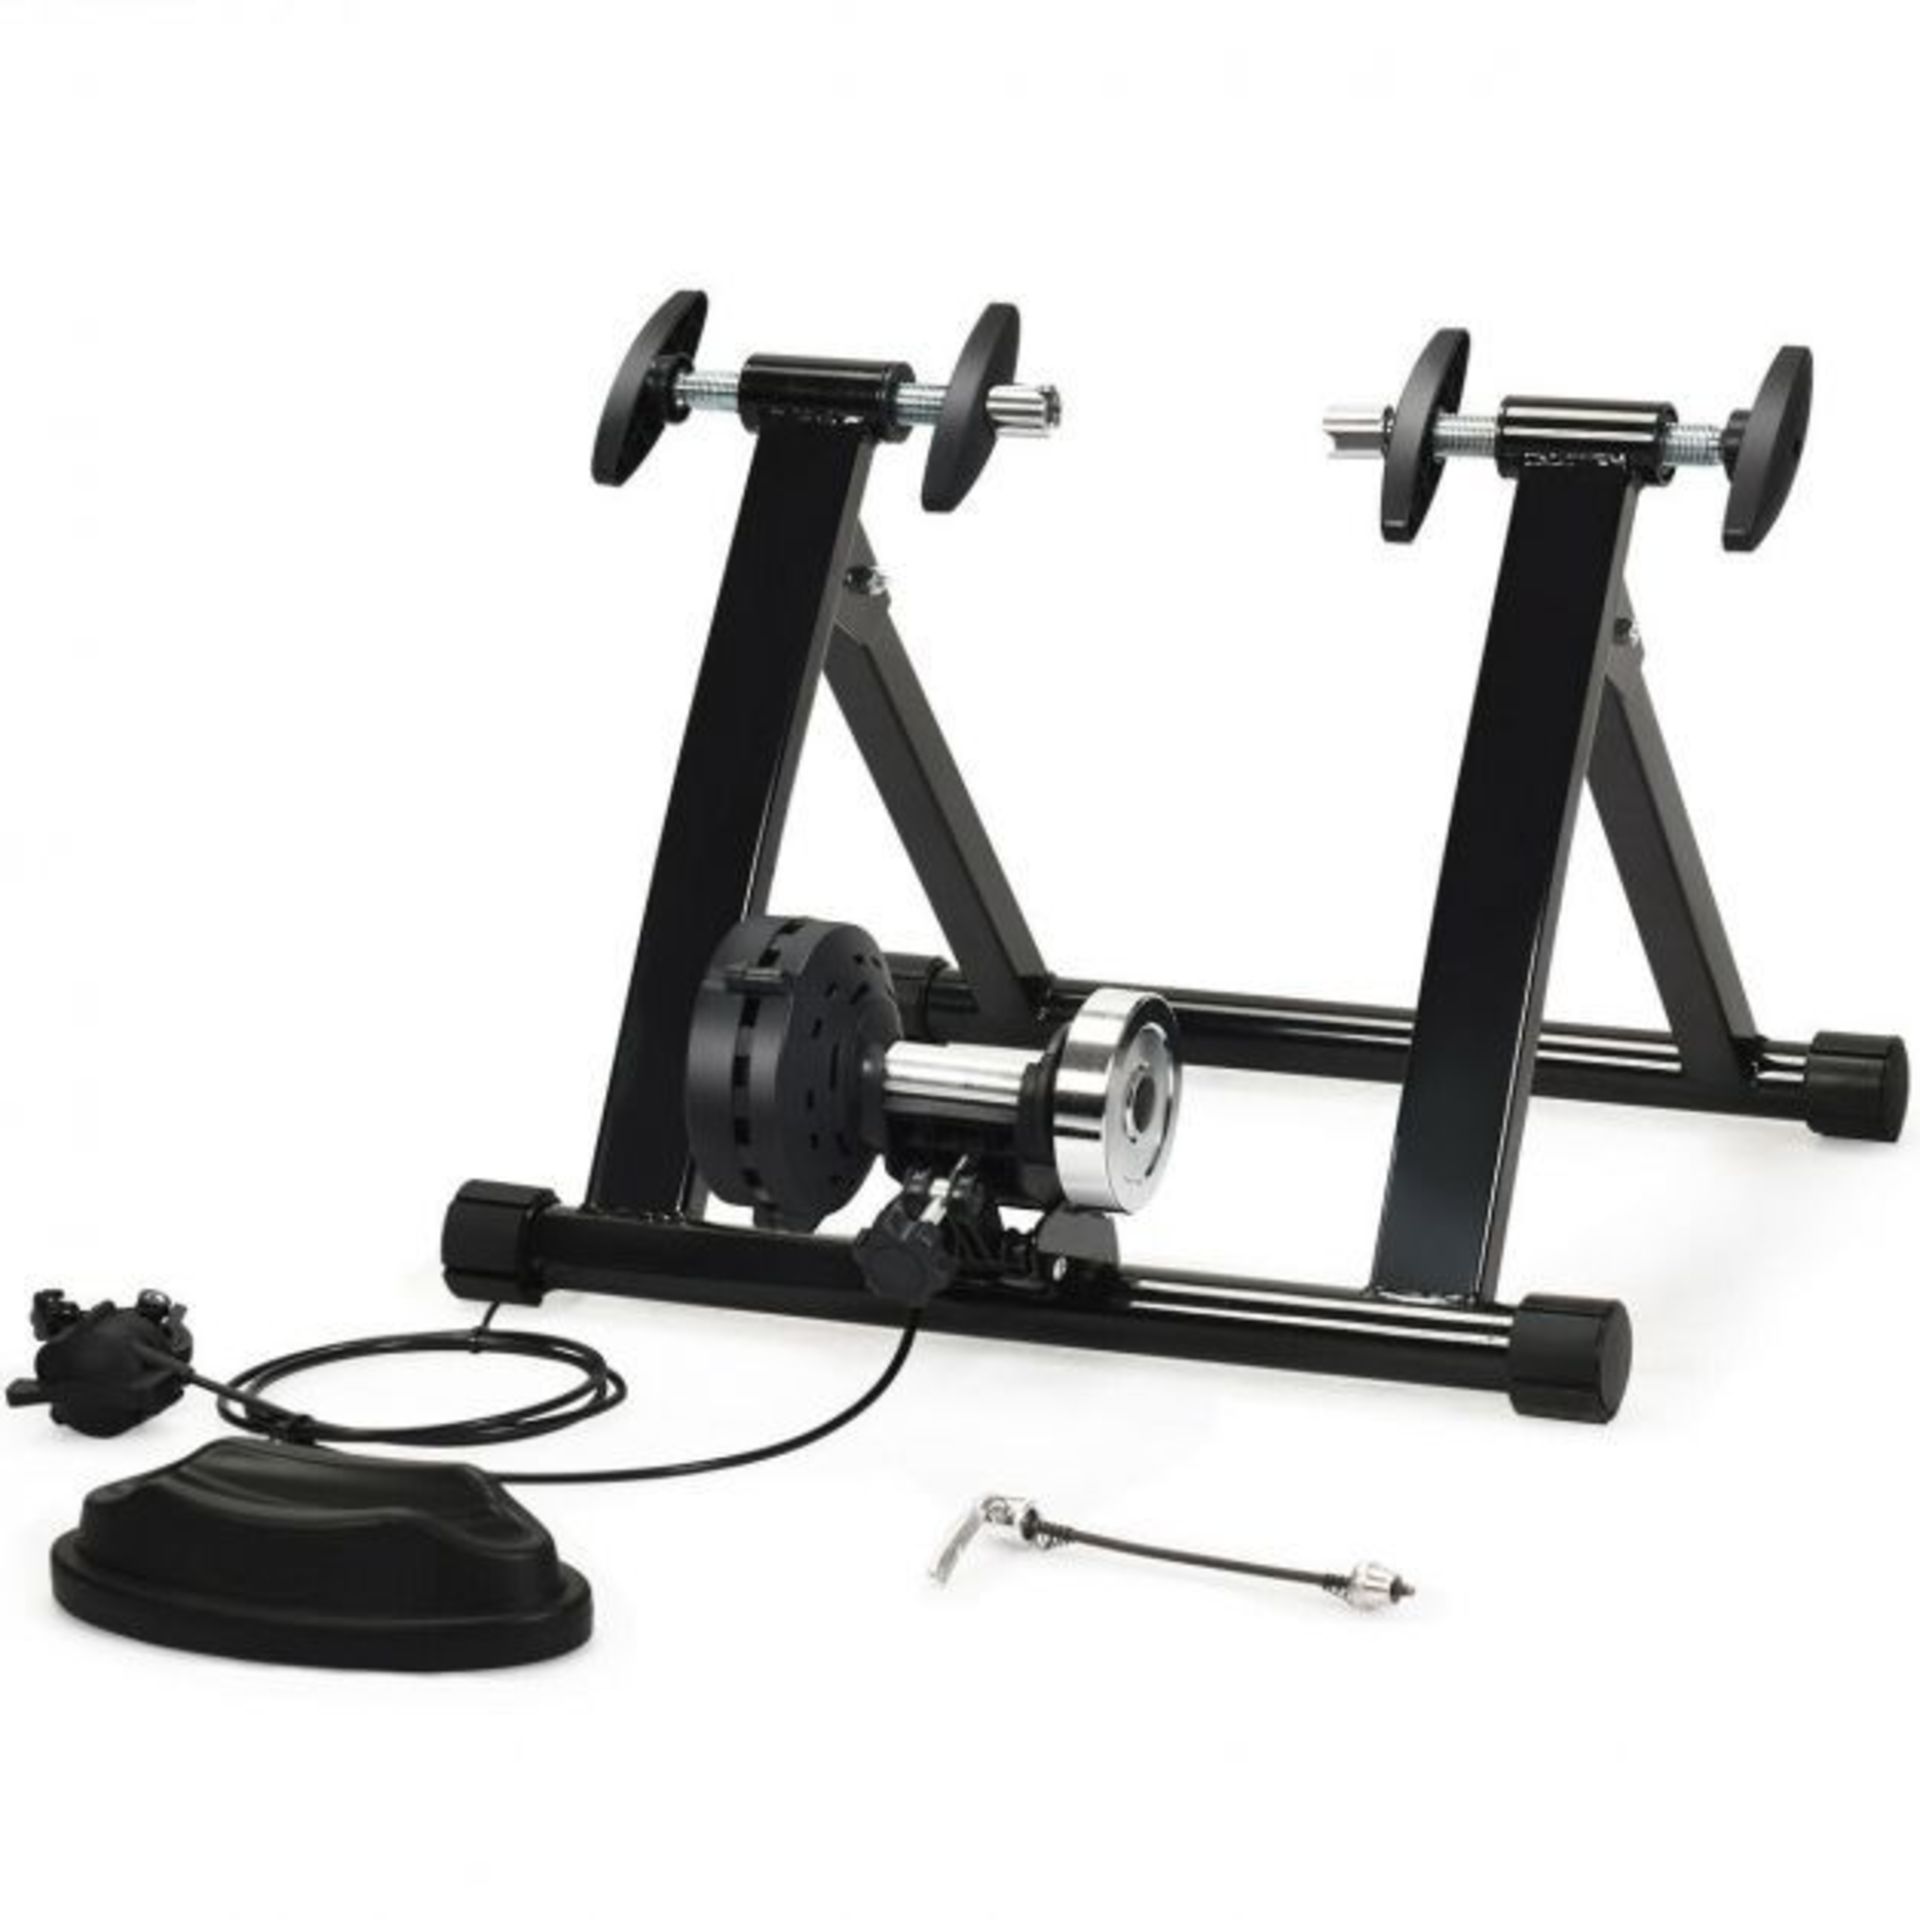 Indoor Bicycle Trainer Stand with 8 Resistance Levels. - ER25. When the weather is grim but you need